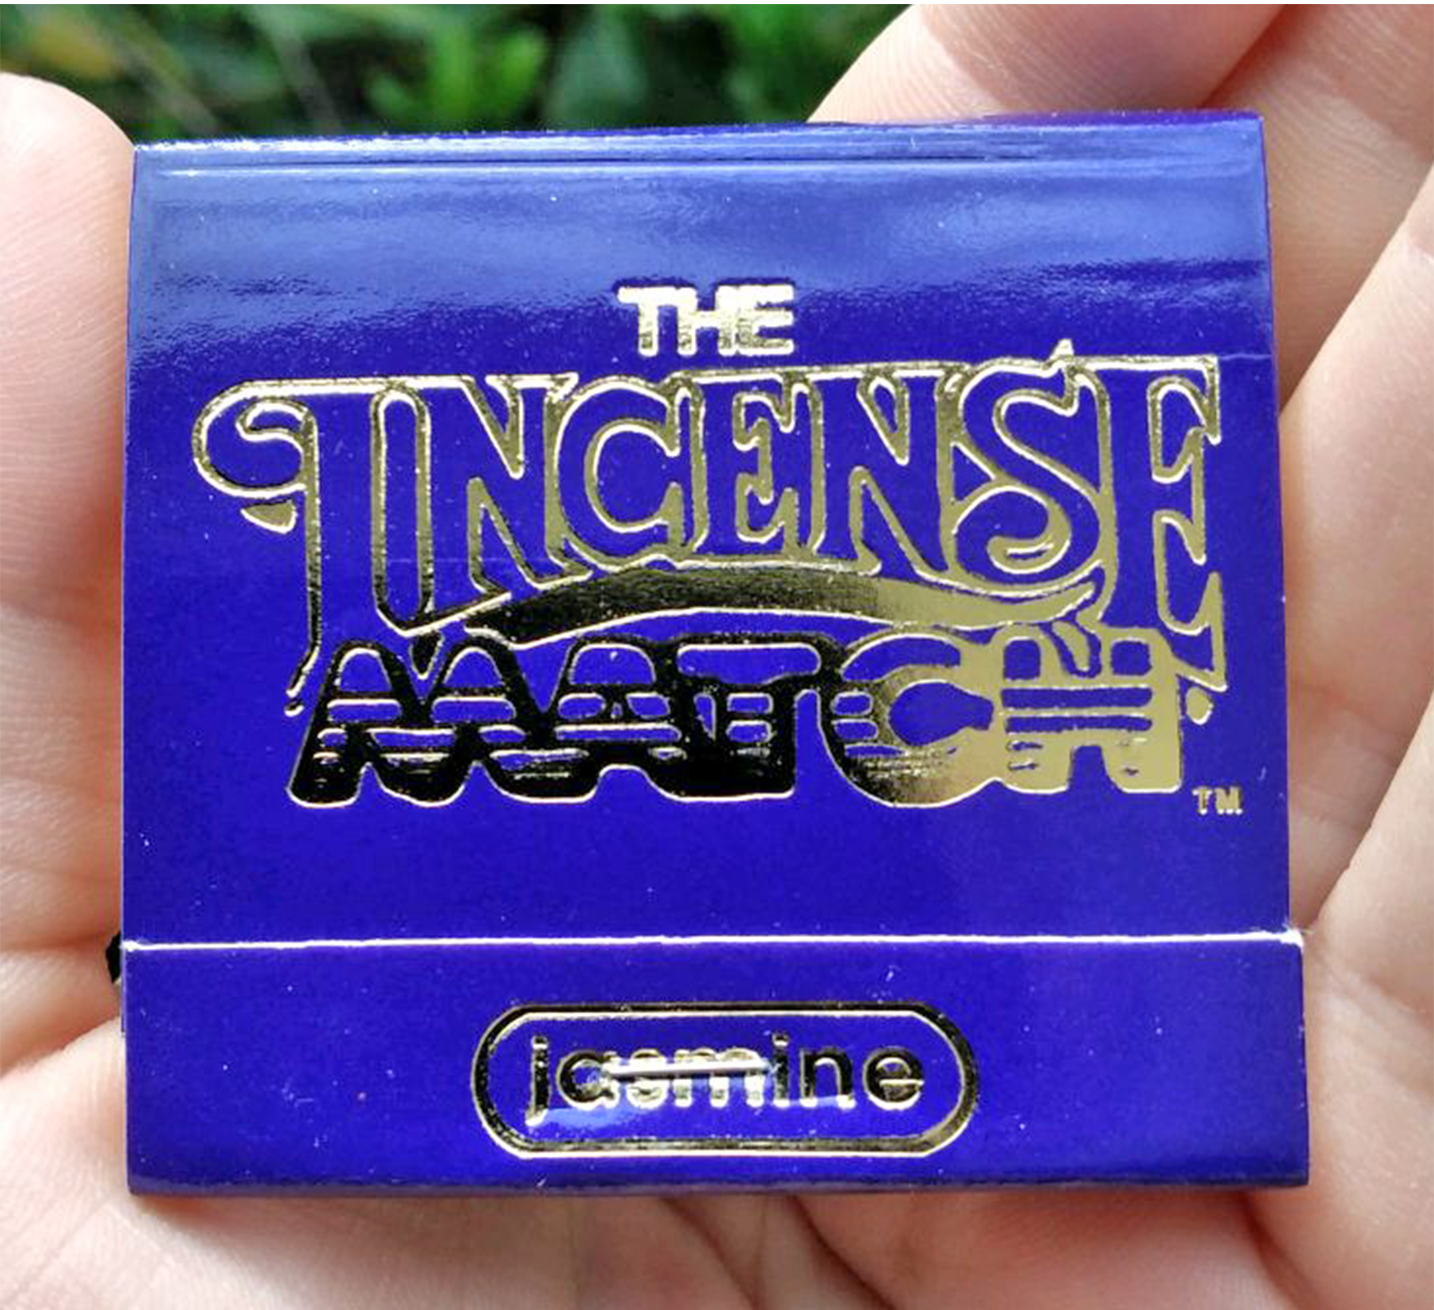 Incense Matchbook - Scented Matches for Meditation &amp; Rituals - Jasmine